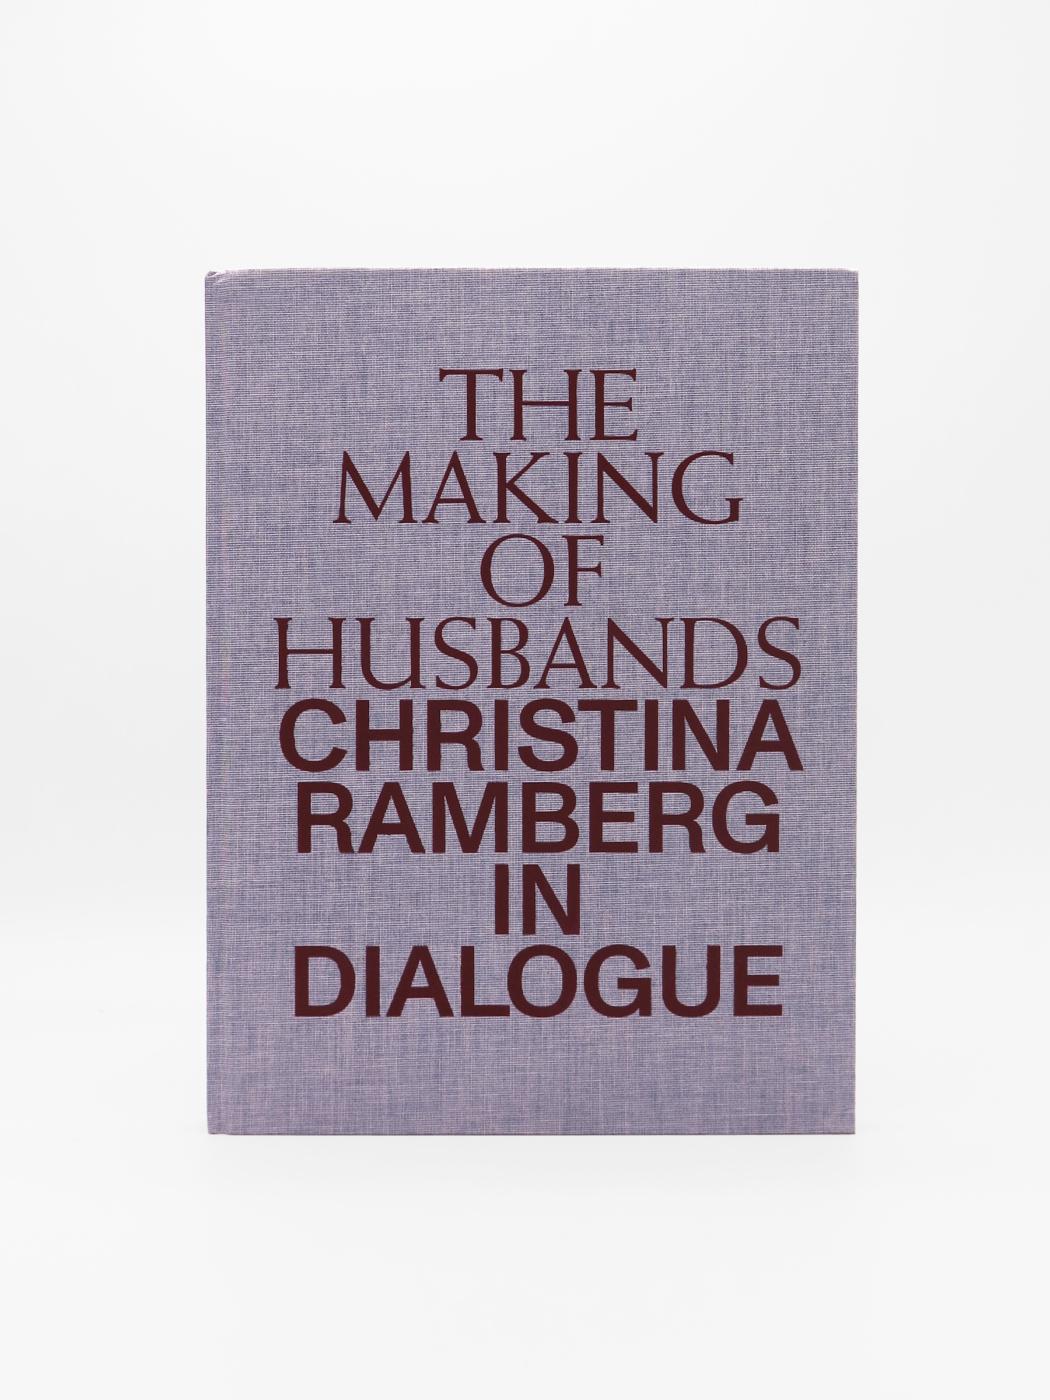 The Making of Husbands: Christina Ramberg in Dialogue